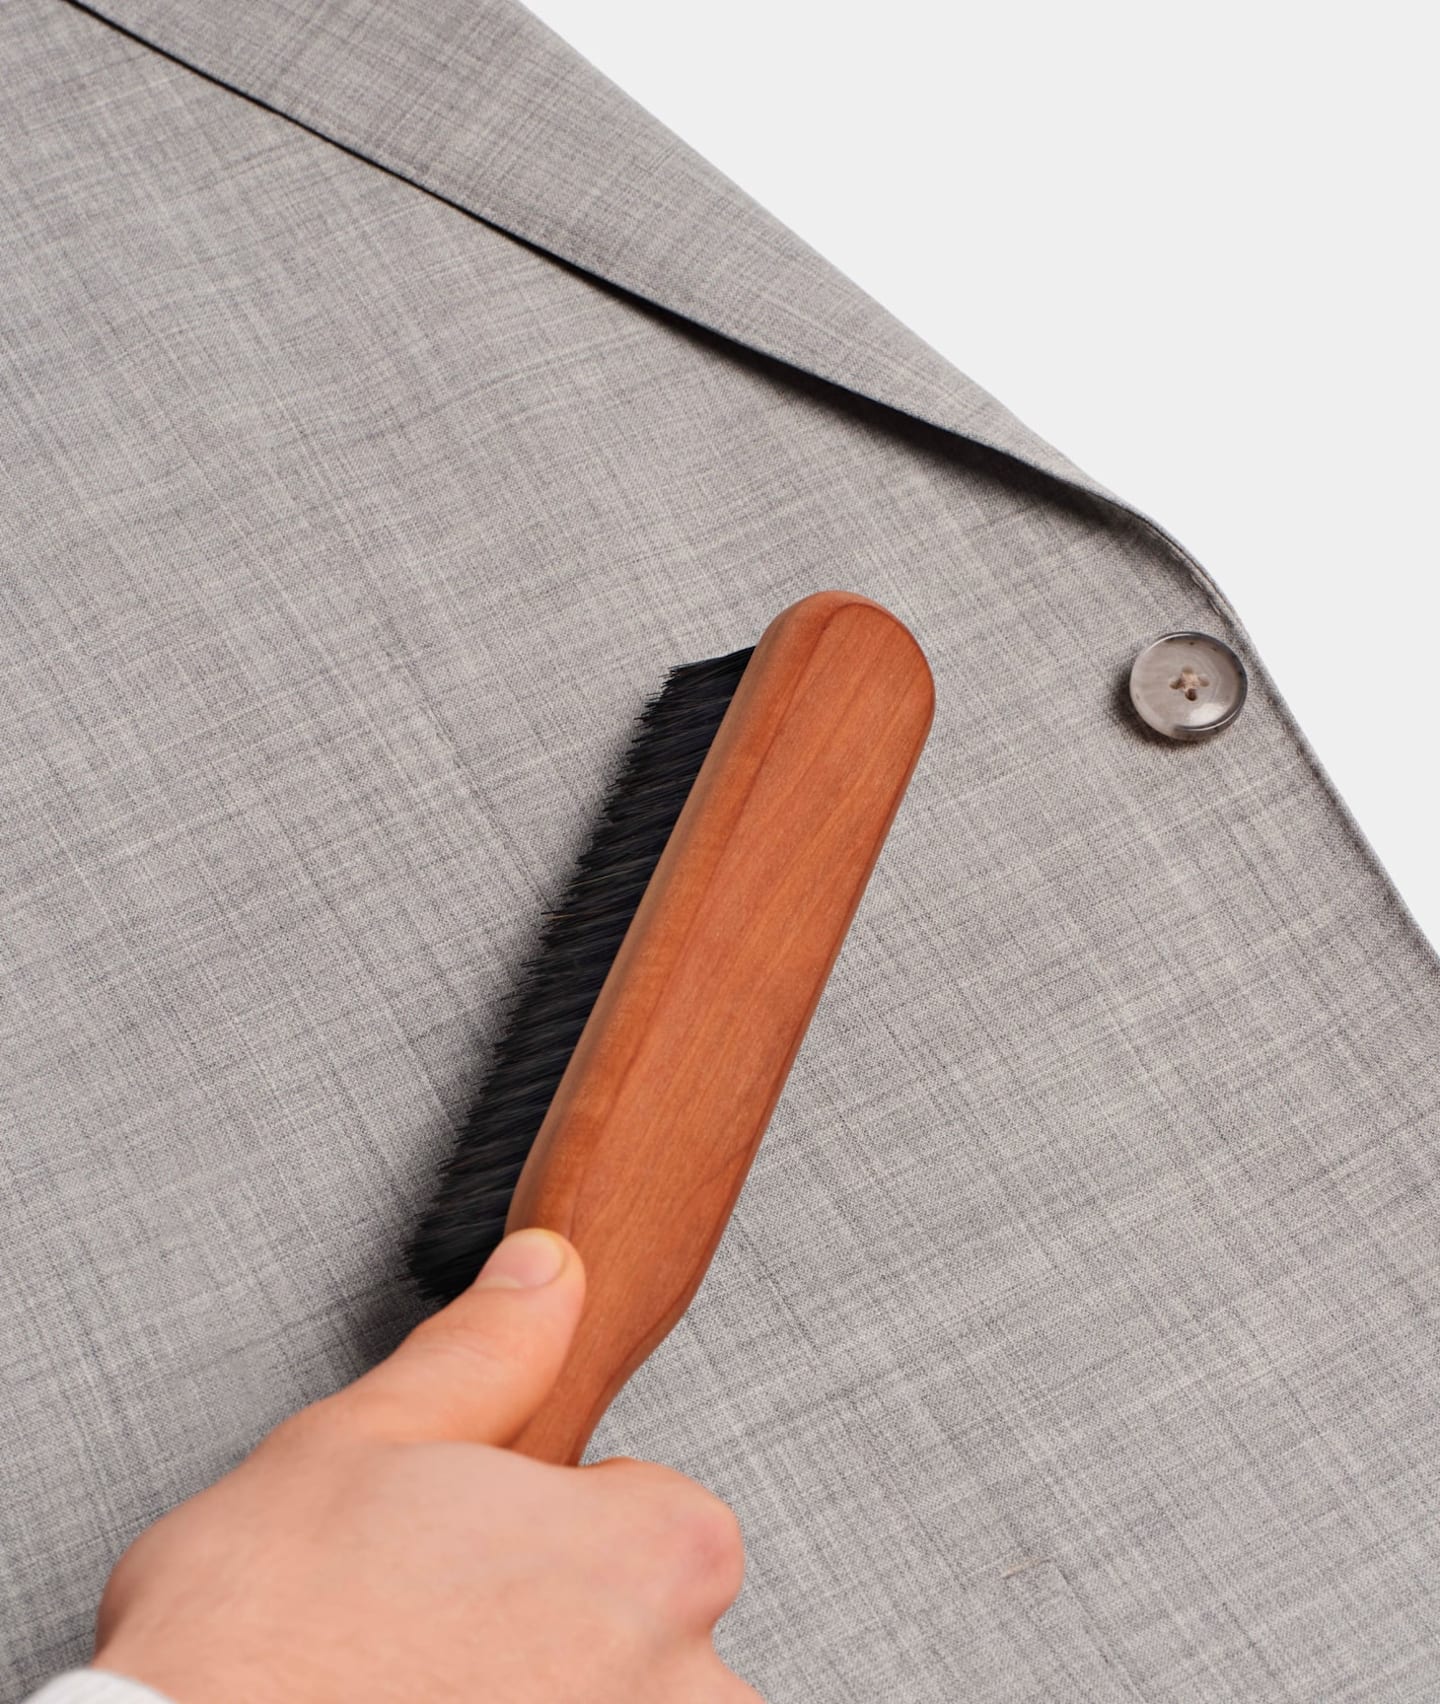 Brushing a grey suit jacket with wooden boar hair brush.